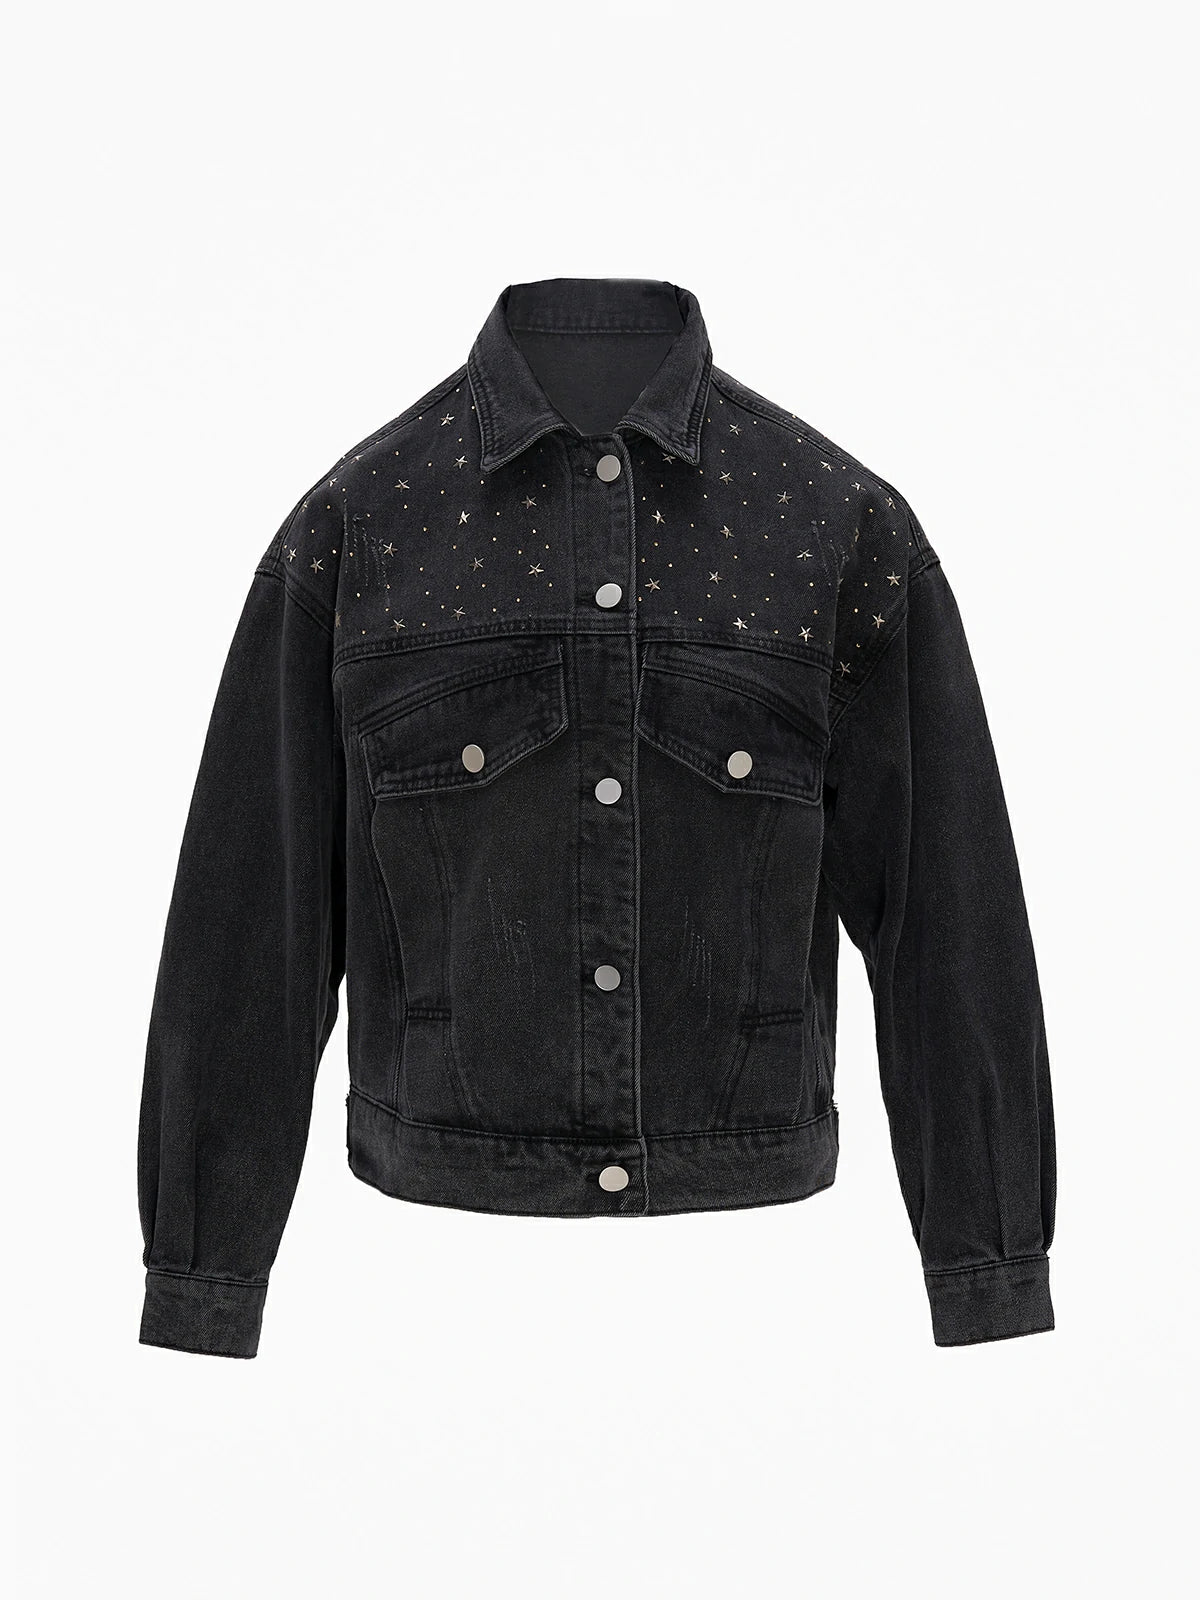 Elevate your confidence and comfort in this short denim jacket with star-shaped bead embellishments.